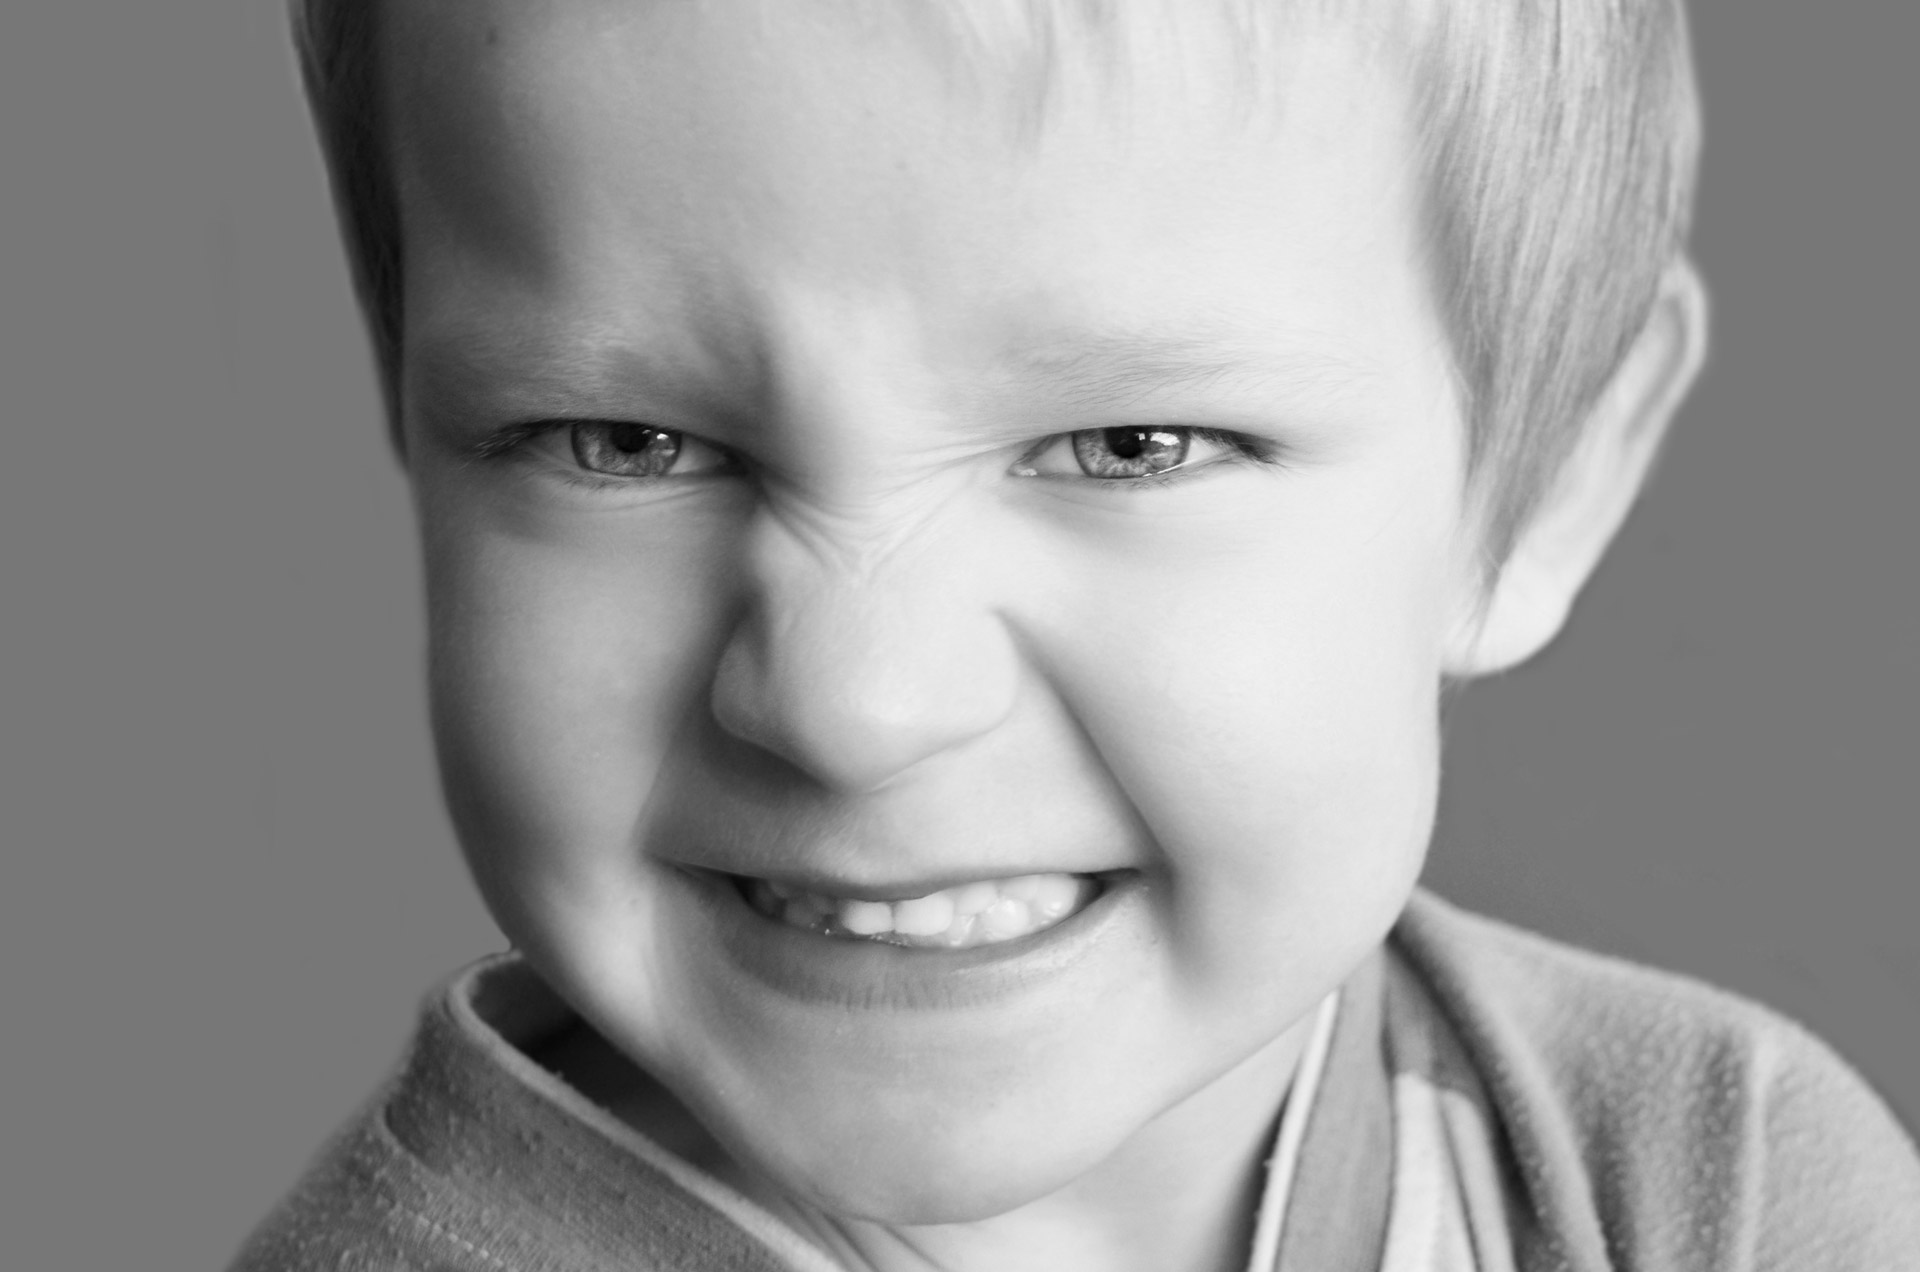 snarling child frown free photo